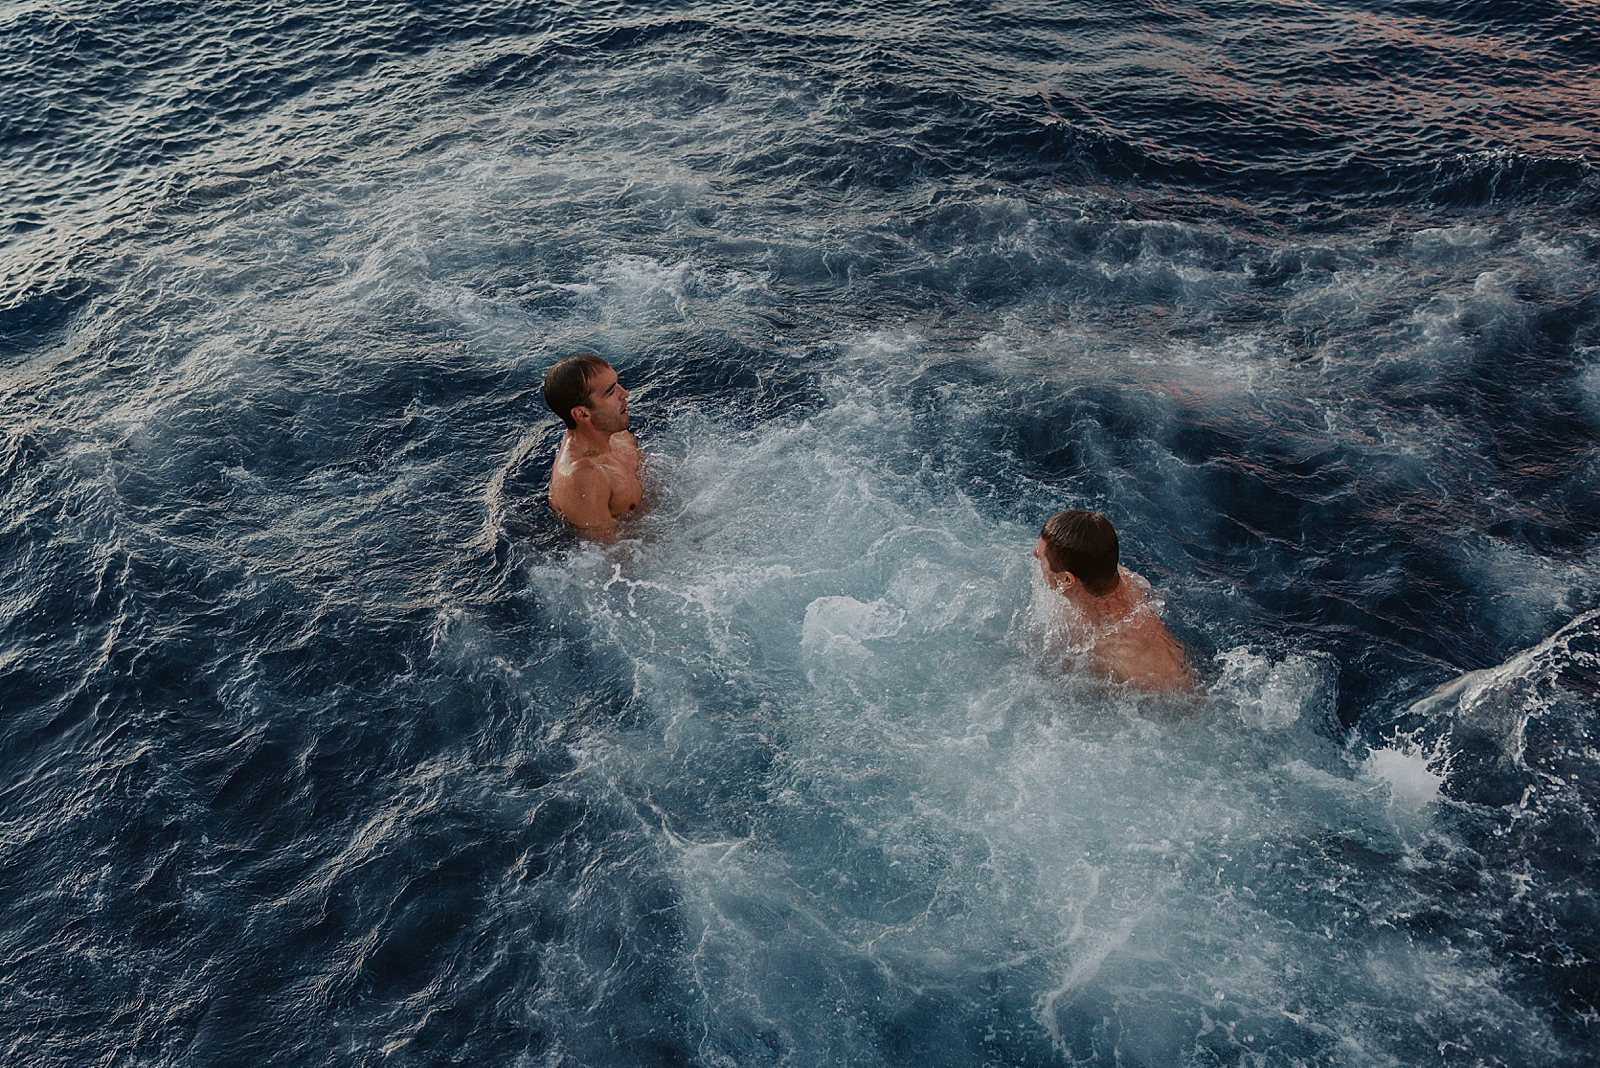 Couple of guys swimming in the ocean